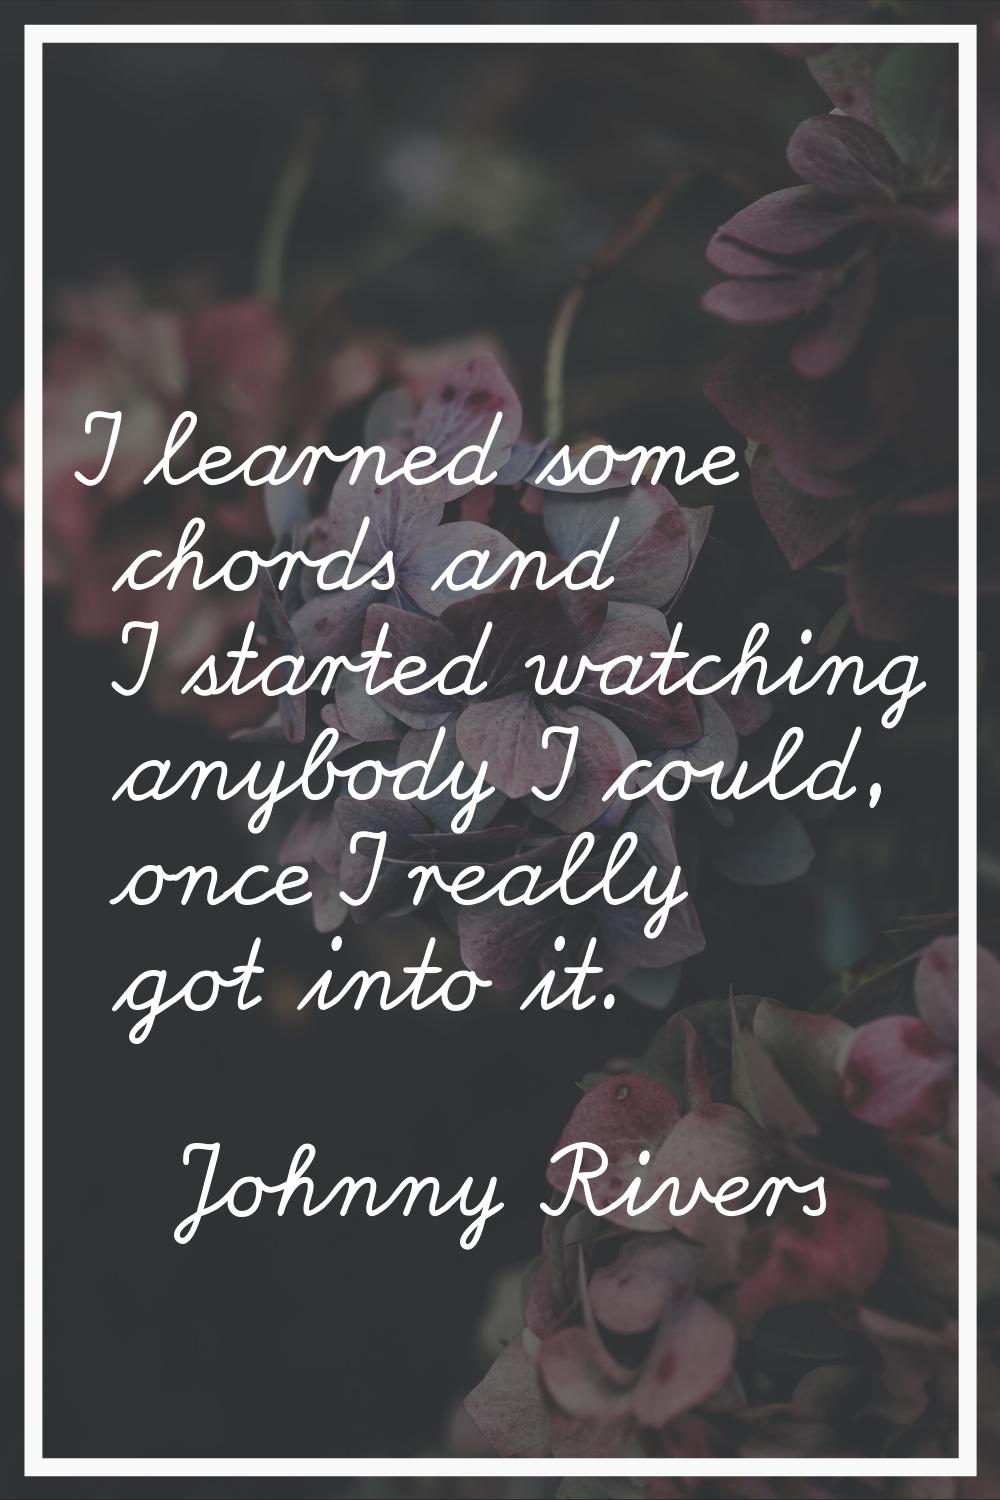 I learned some chords and I started watching anybody I could, once I really got into it.